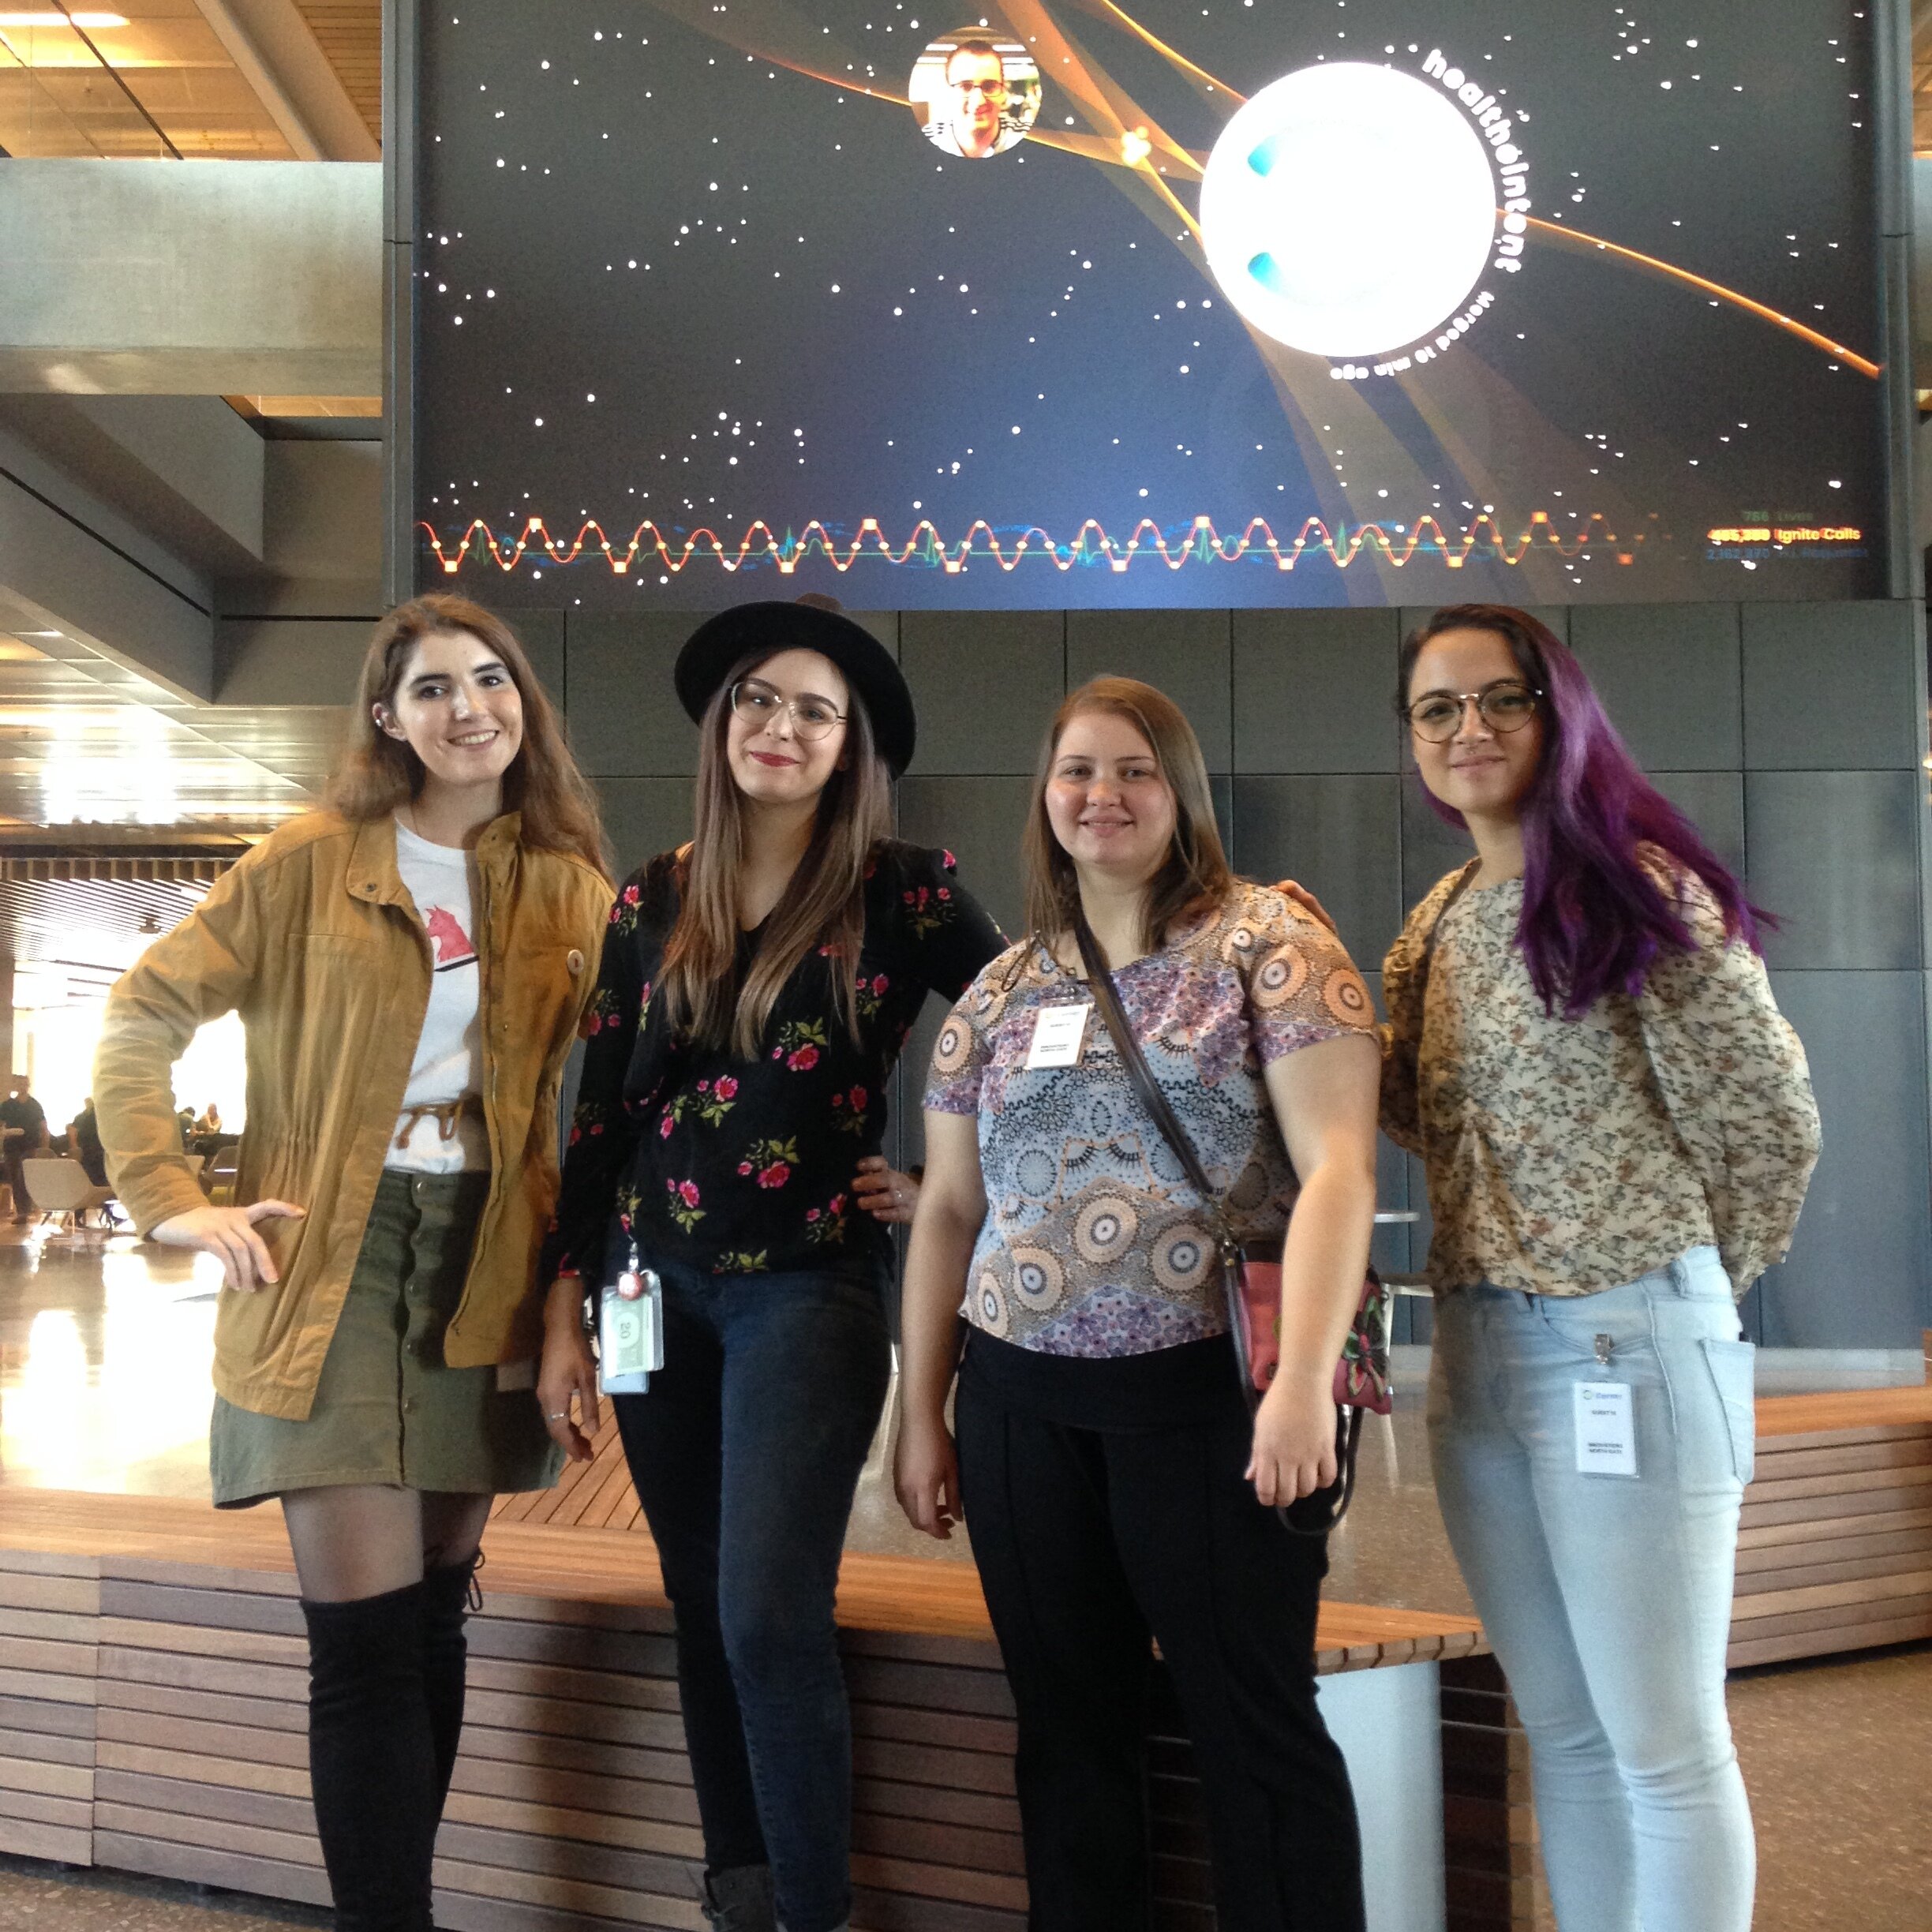 anna-therese fowler, cerner 2019 point of contact, with mentees jessica andreas, katie wynn, and rylie lawver.